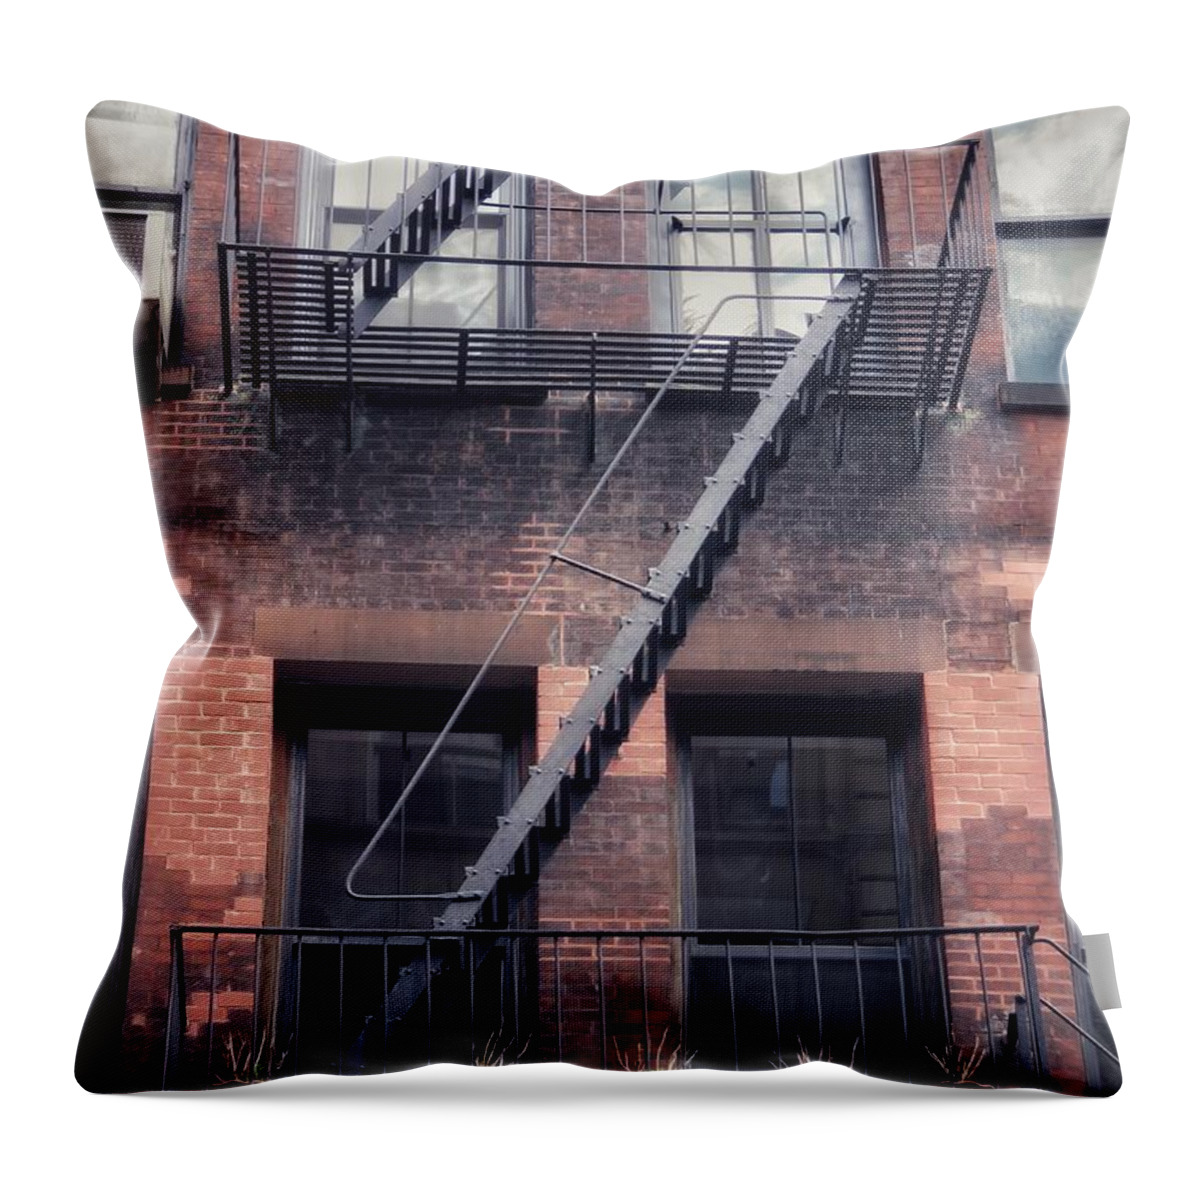 Fire Escape Throw Pillow featuring the photograph Fire Escape by Diana Rajala